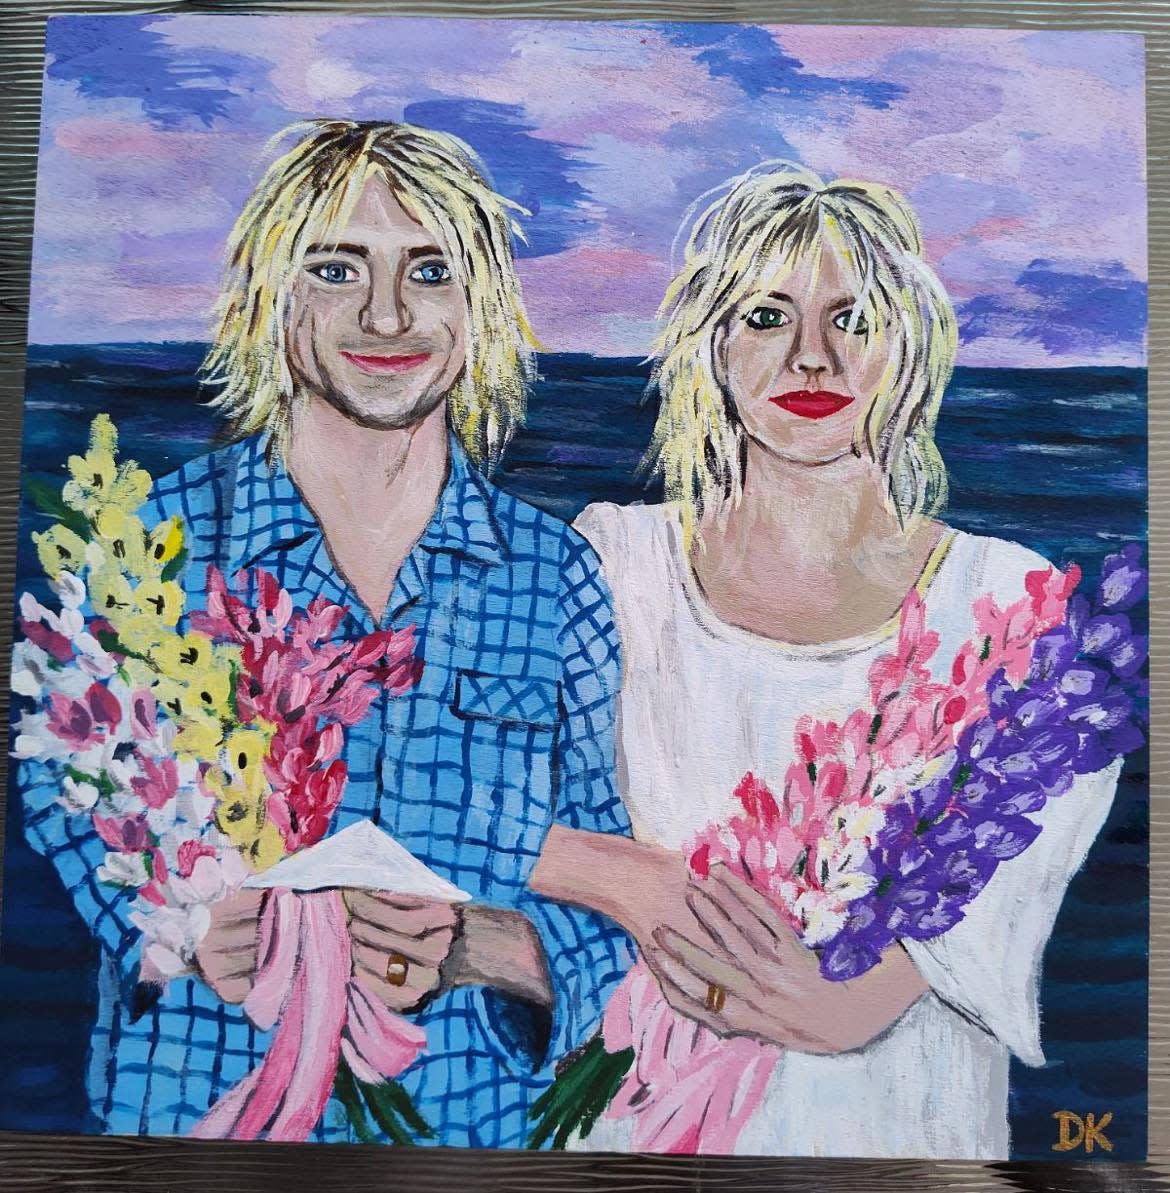 This painting by Dan Kane of '90s rock stars Kurt Cobain and Courtney Love will be among the artwork featured in the "Time" art show Friday at Silo Arts Studio in downtown Canton.